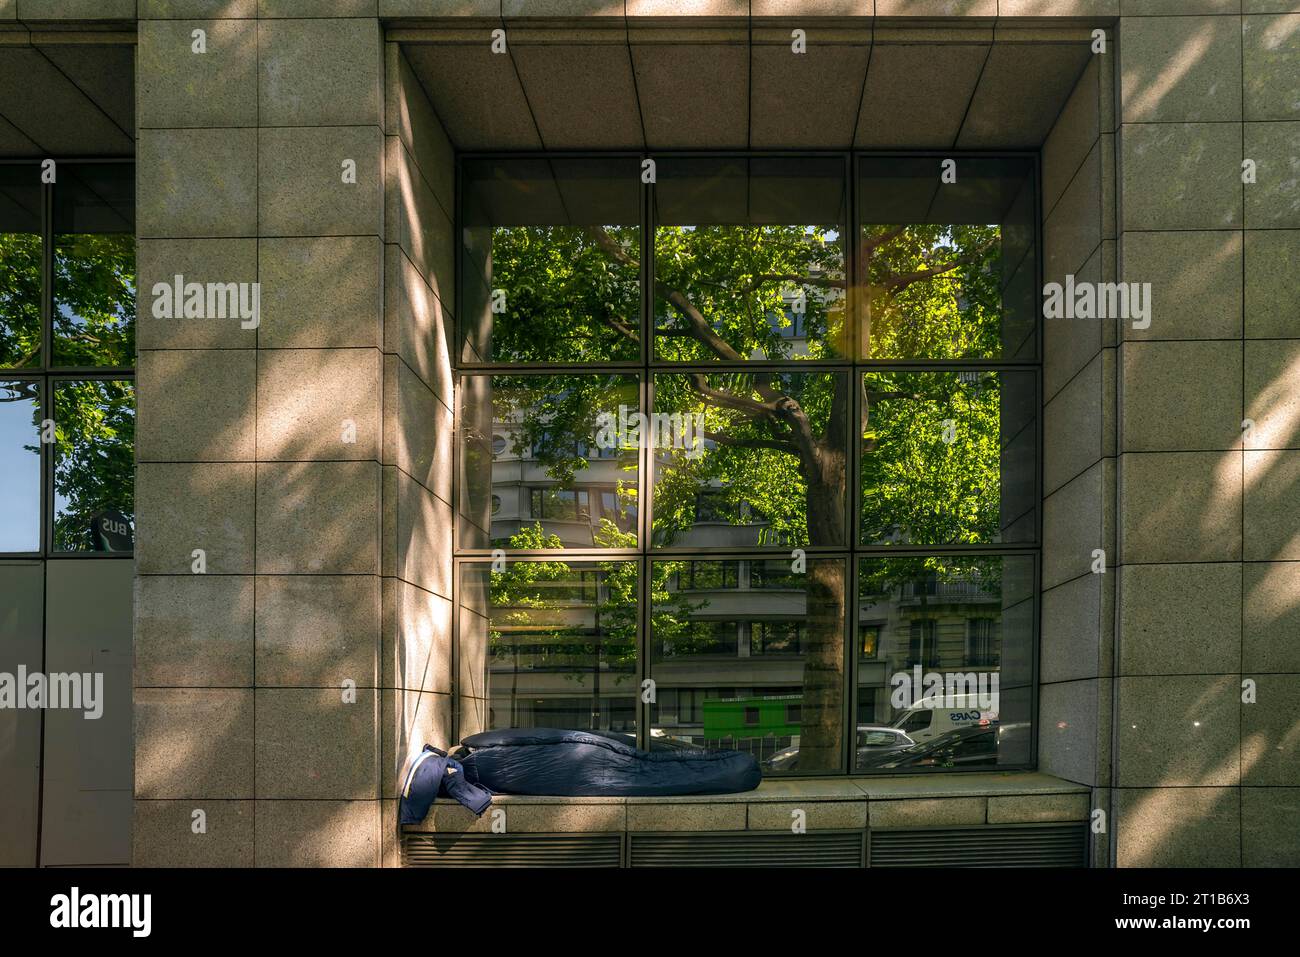 Homeless person in a window recess of an office building, Paris, France Stock Photo